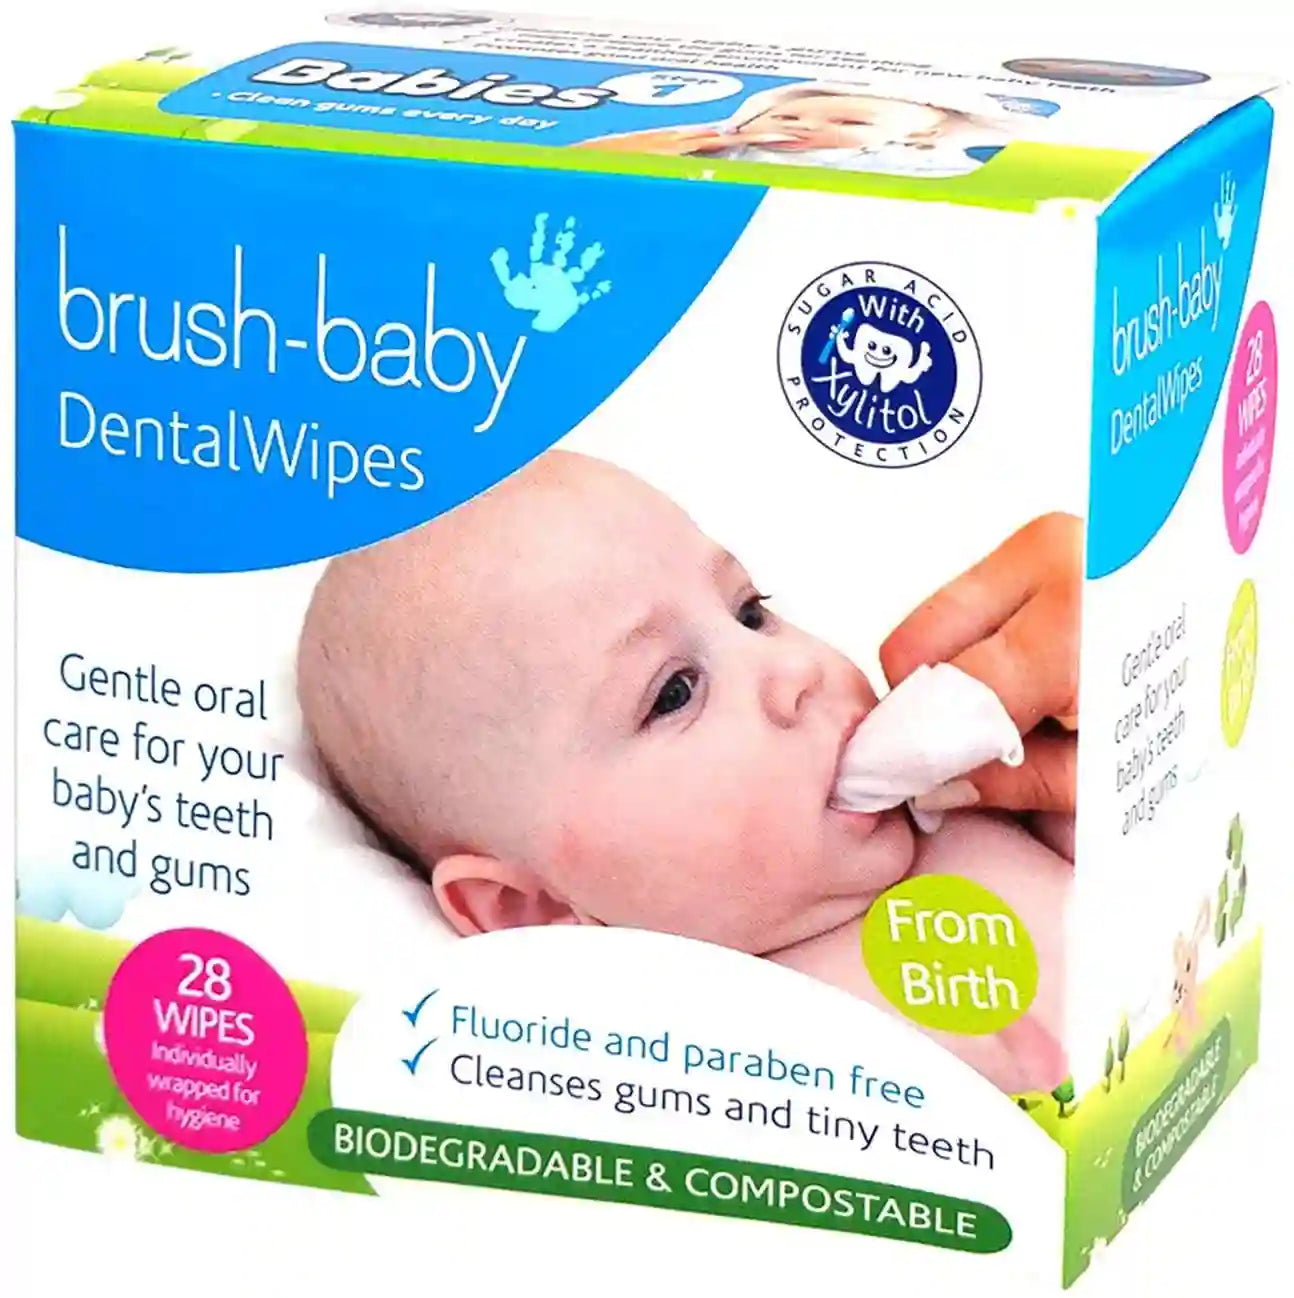 Brush-Baby Dental Wipes Biodegradable 28 Wipes